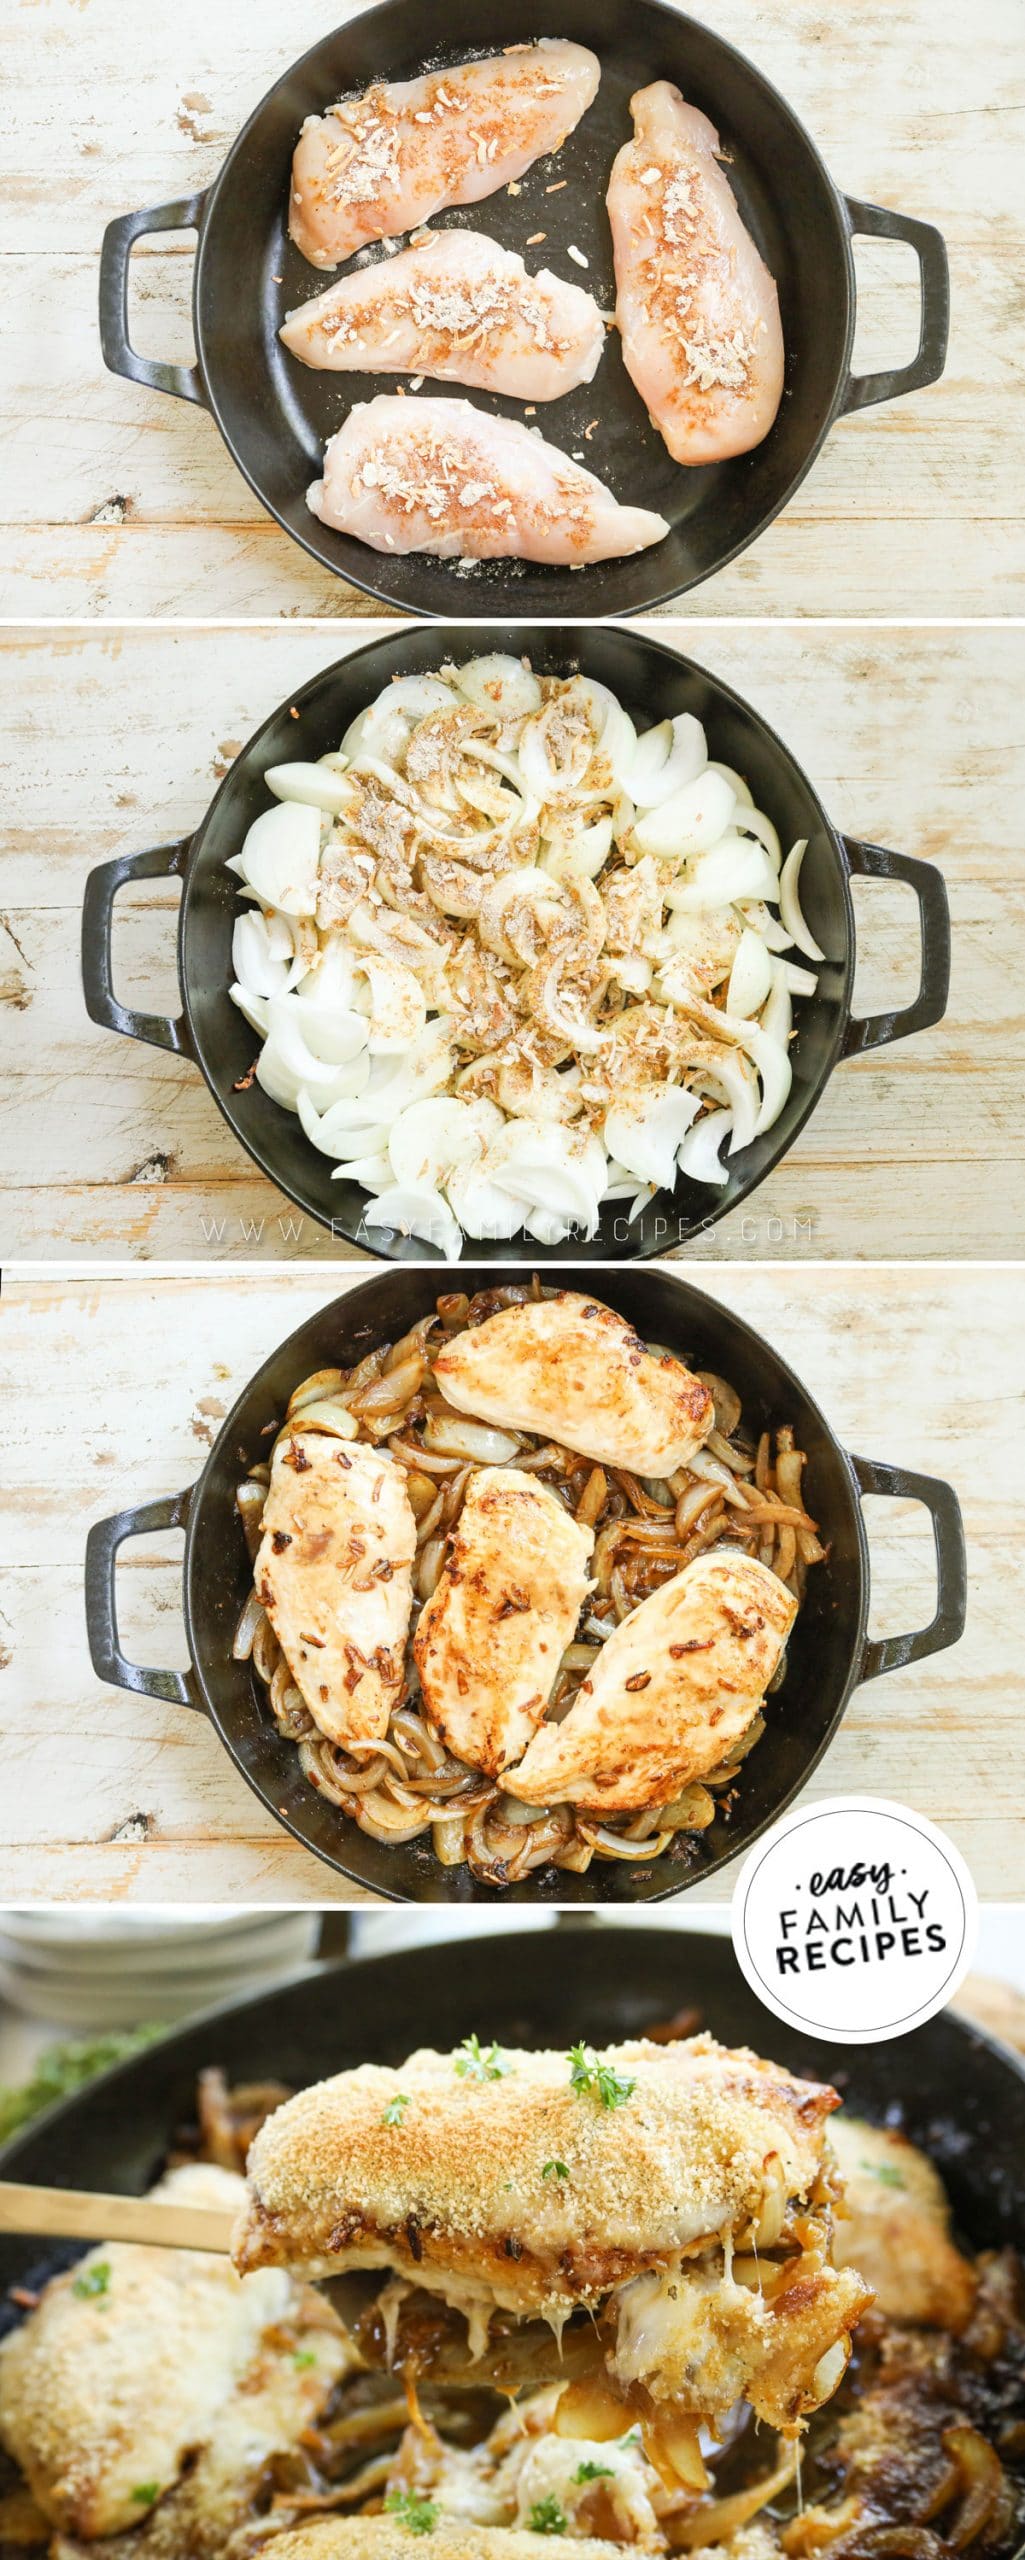 Process photos for how to make French Onion Chicken- 1. Season Chicken Breasts and brown in skillet. 2. Slice onions and caramelize. Add chicken back and top with cheese. 4. Top with bread crumbs and bake.